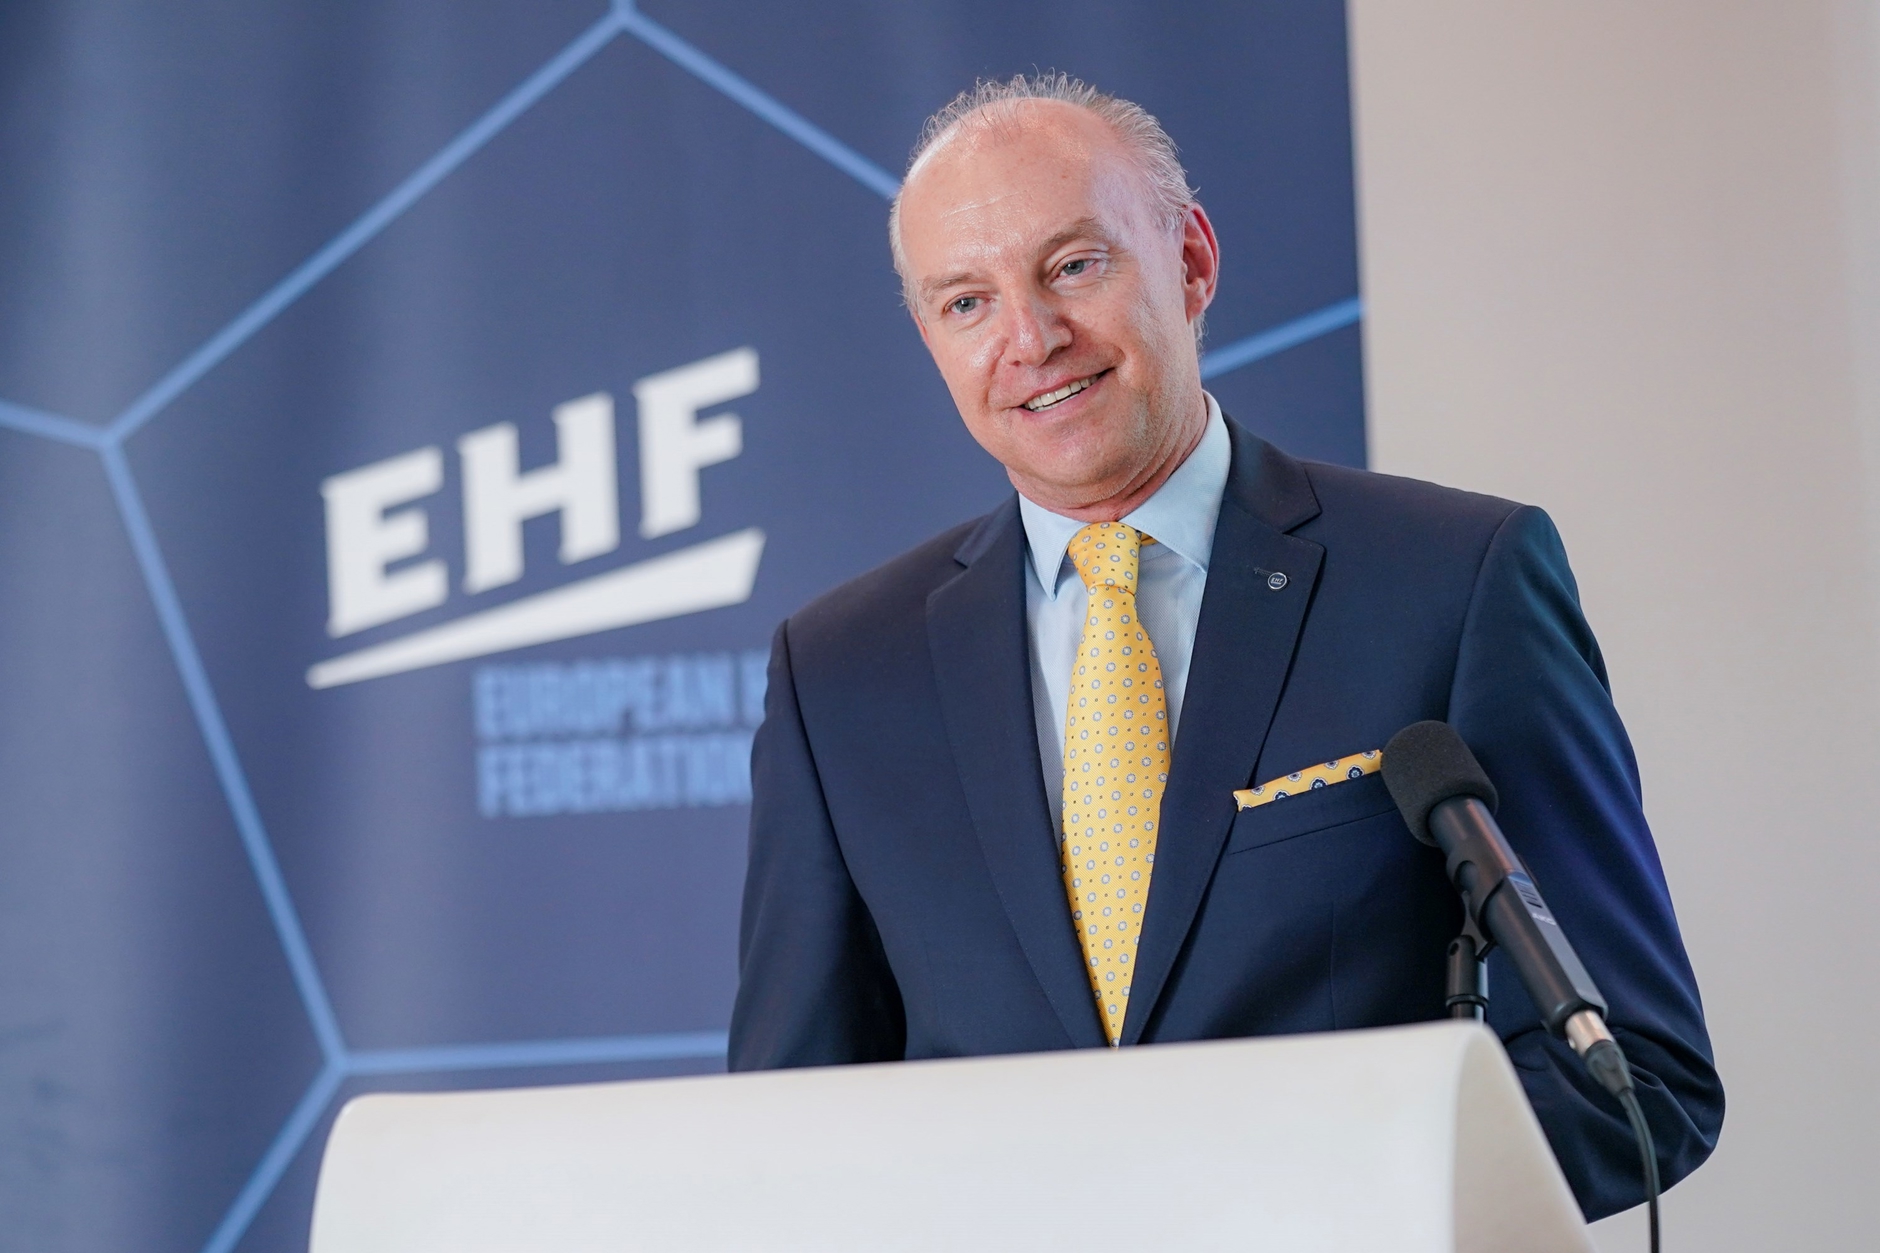 EHF National Heads of Refereeing Convention 2022